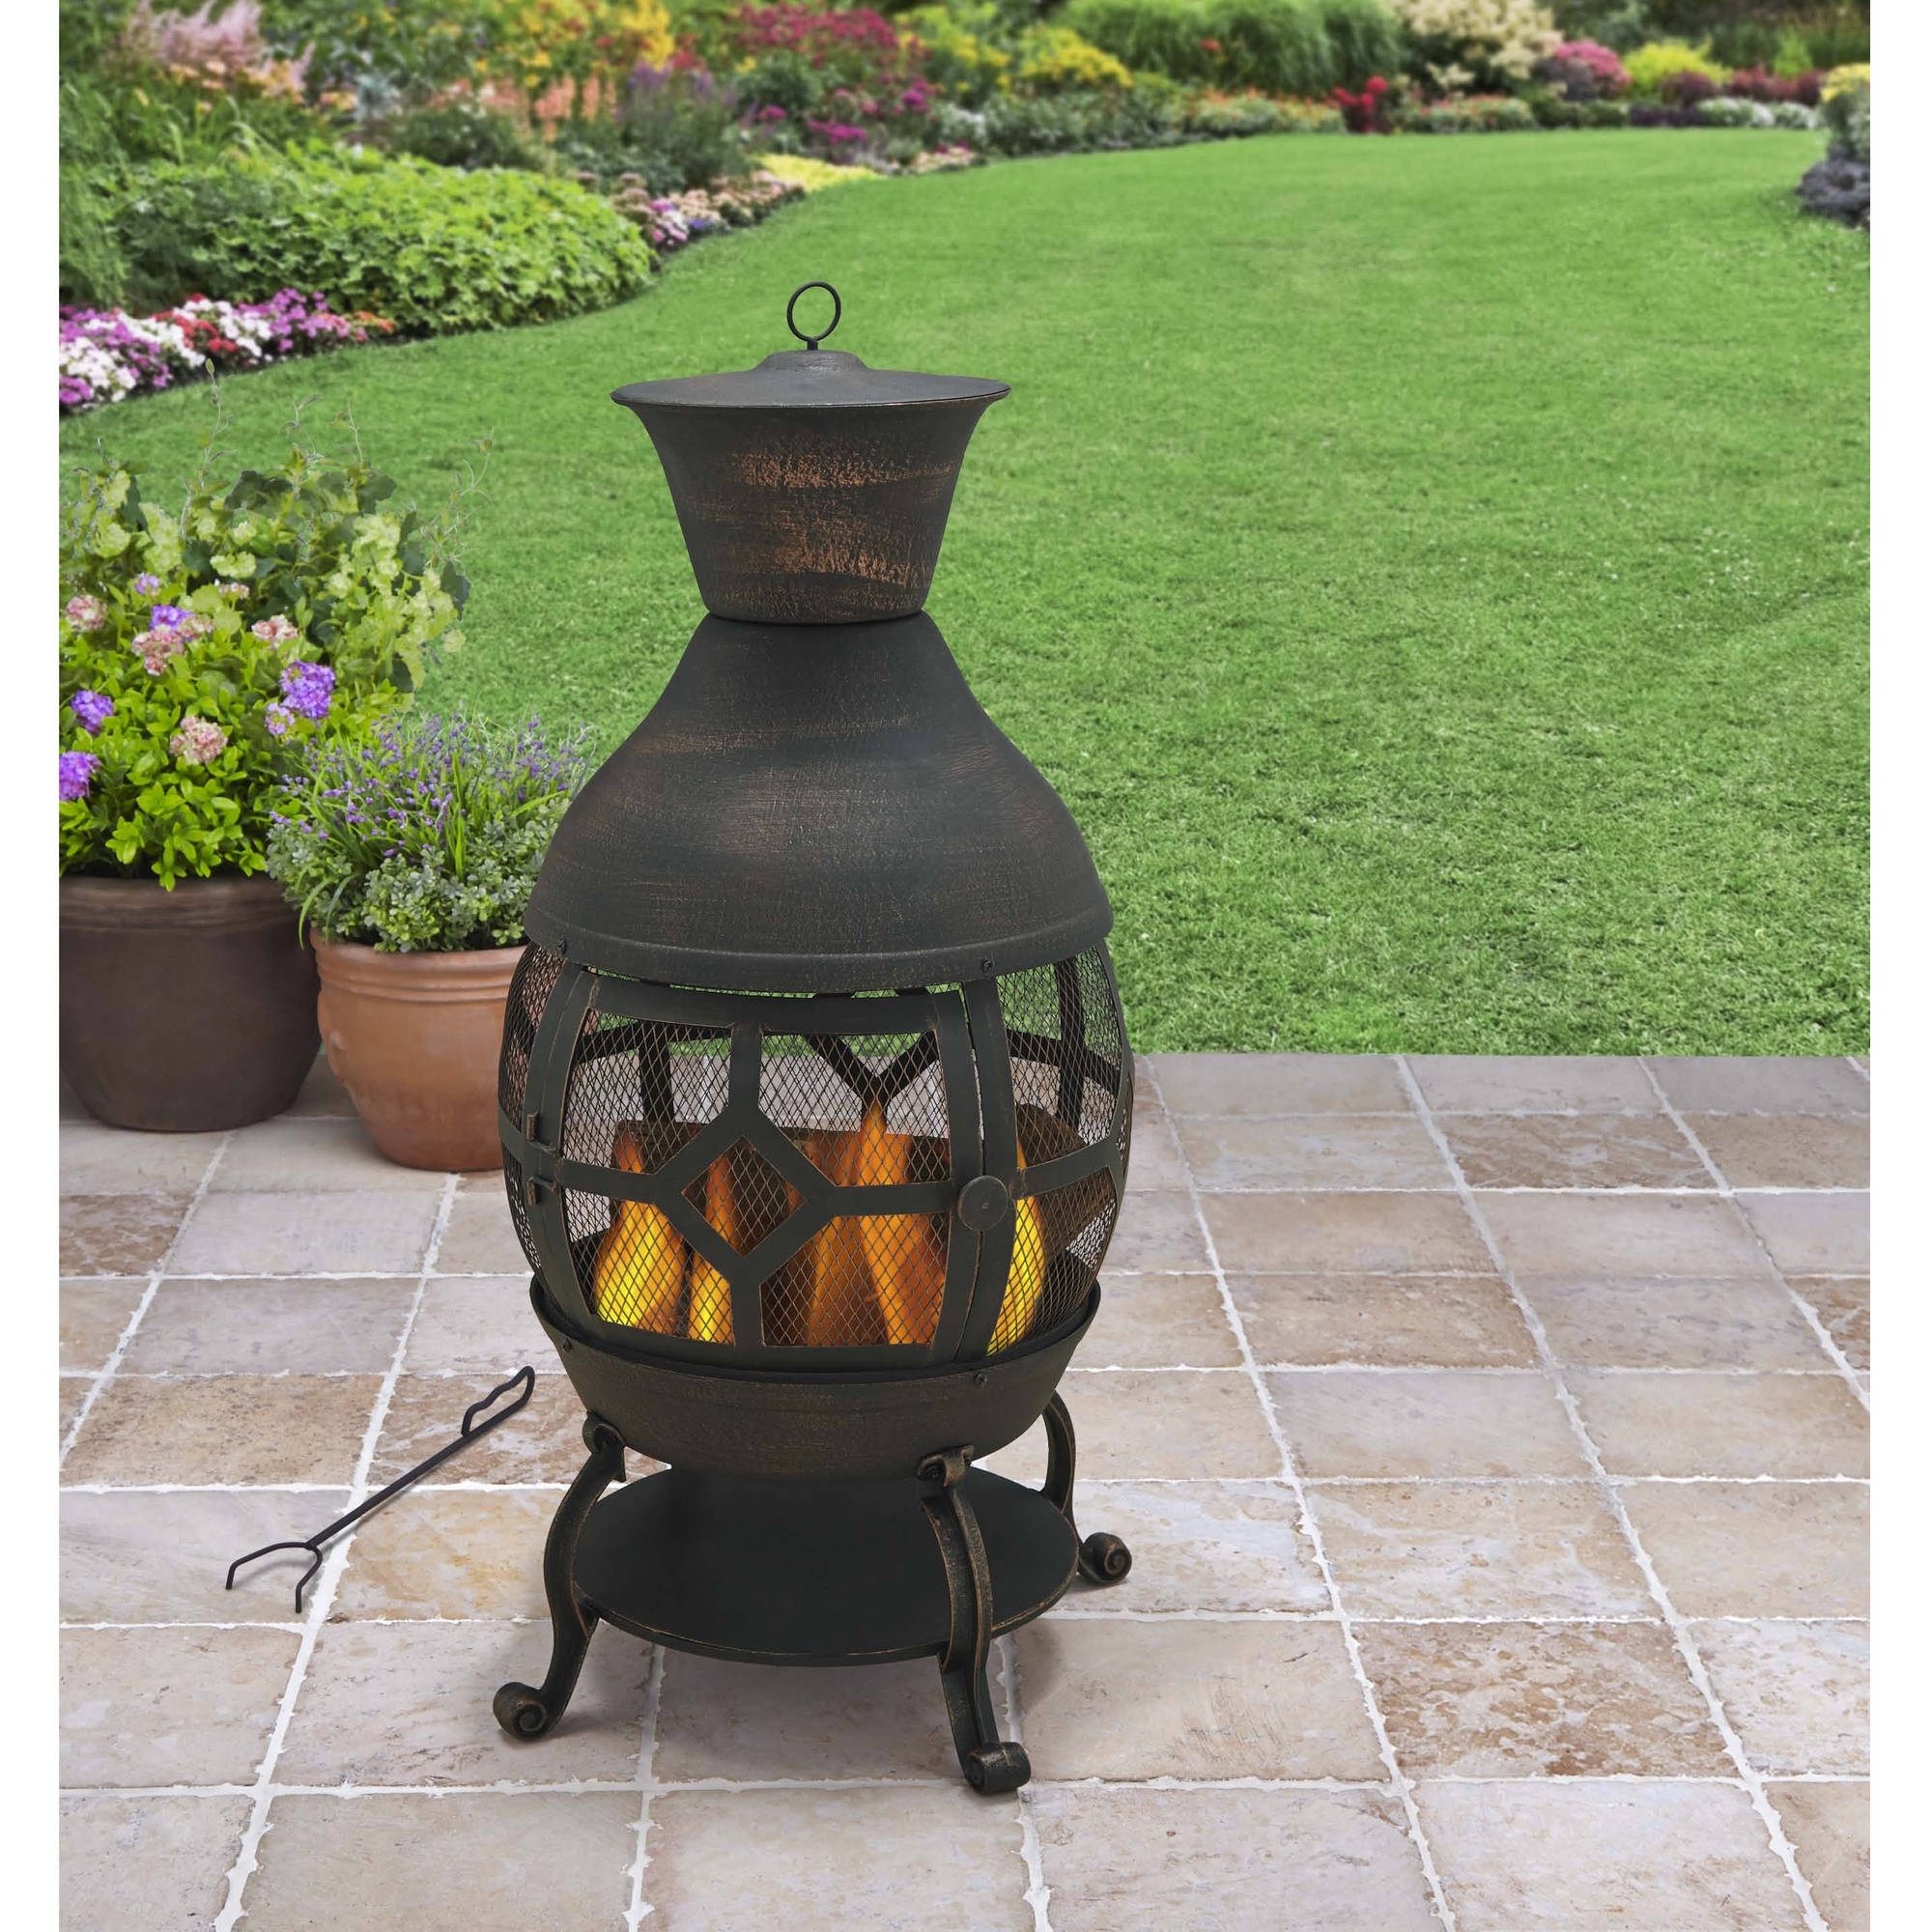 Better Large Clay Chiminea Outdoor Fireplace